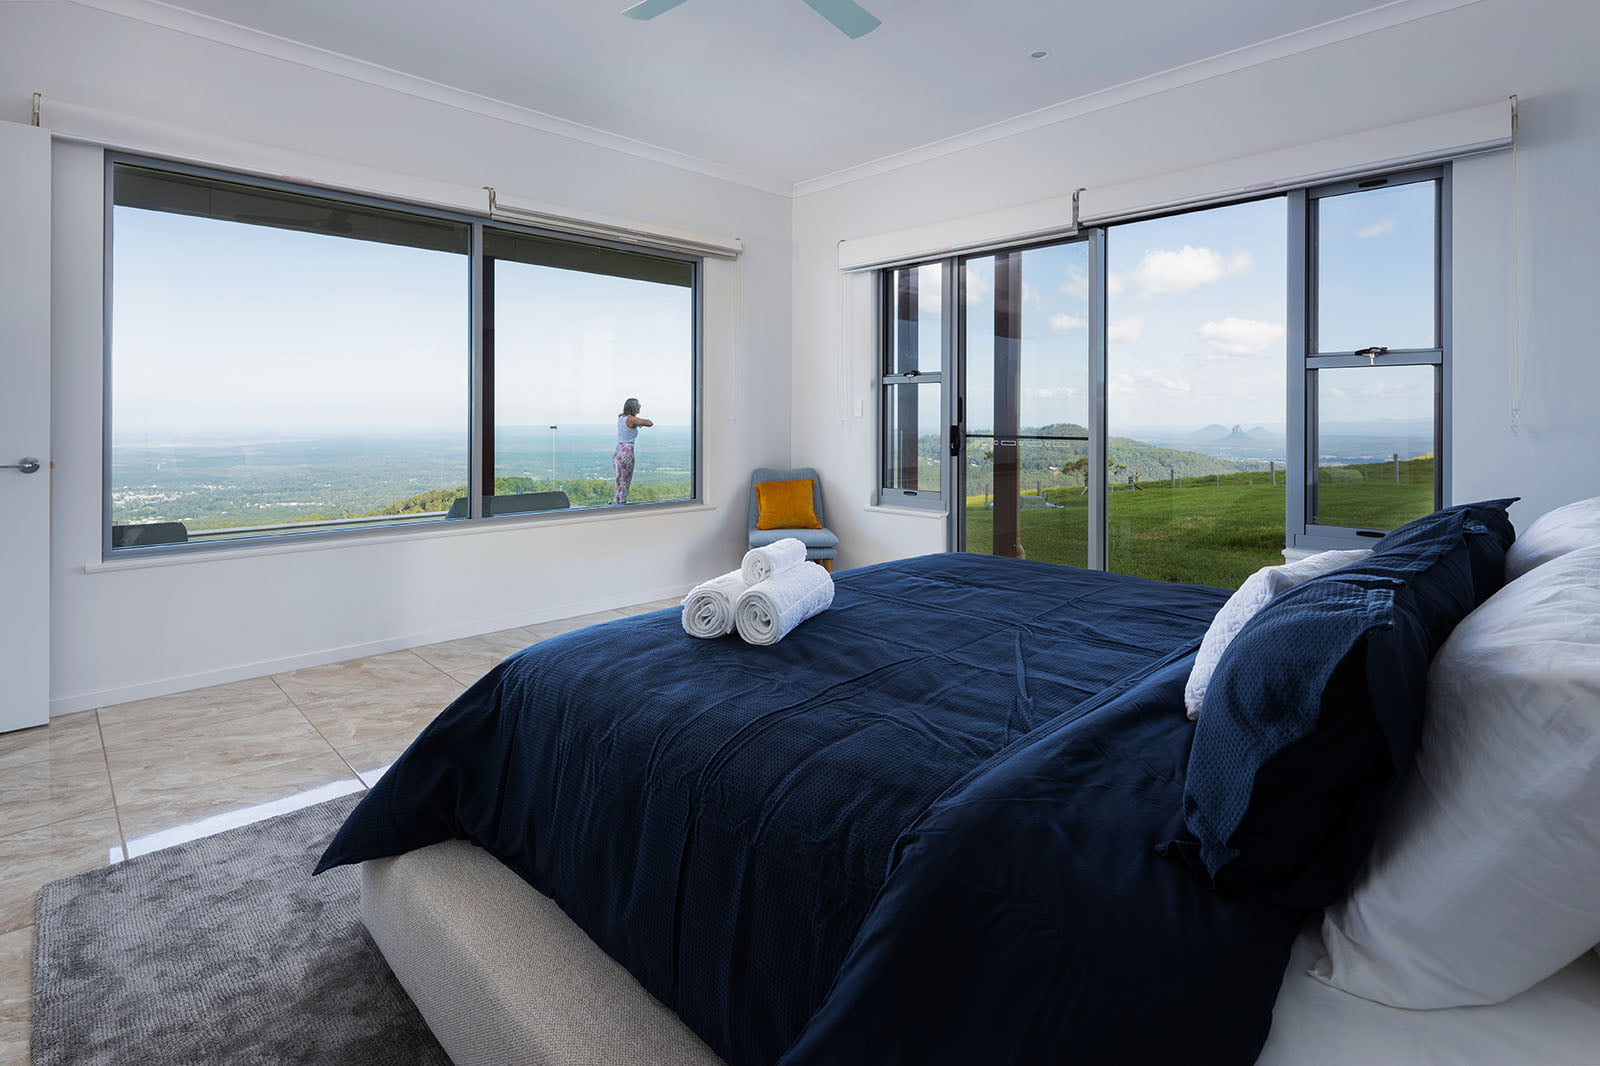 A luxurious bedroom at Petrichor Estate, the magnificent 360-degree views. Enjoy ultimate comfort in one of our lavish bedrooms and relax in our 2.5 bathrooms.